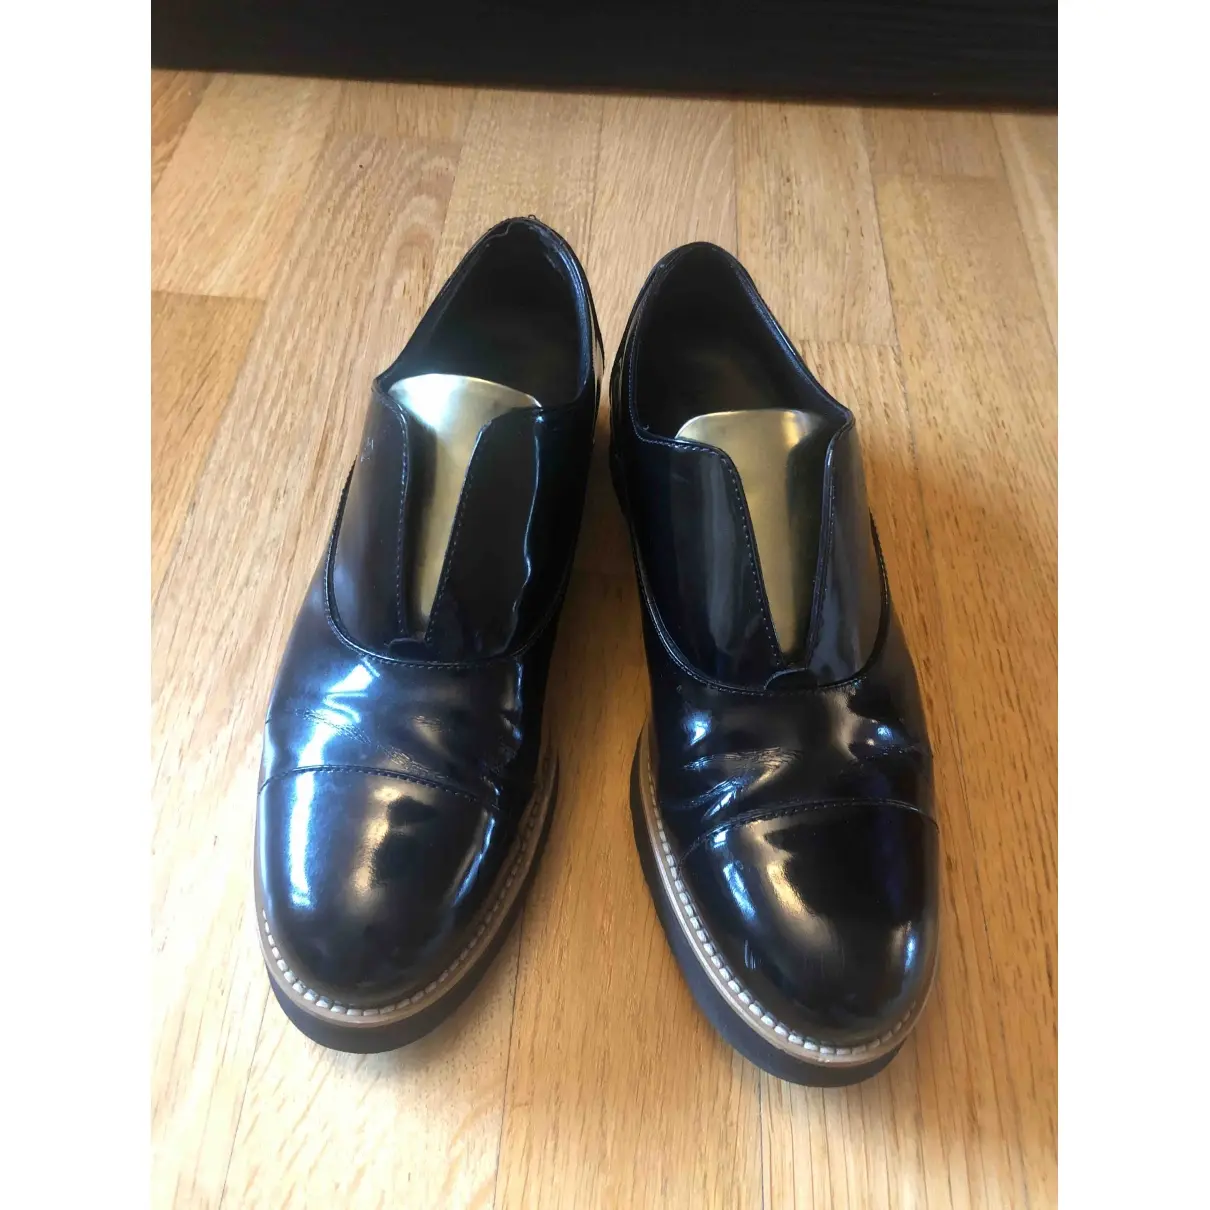 Hogan Patent leather flats for sale